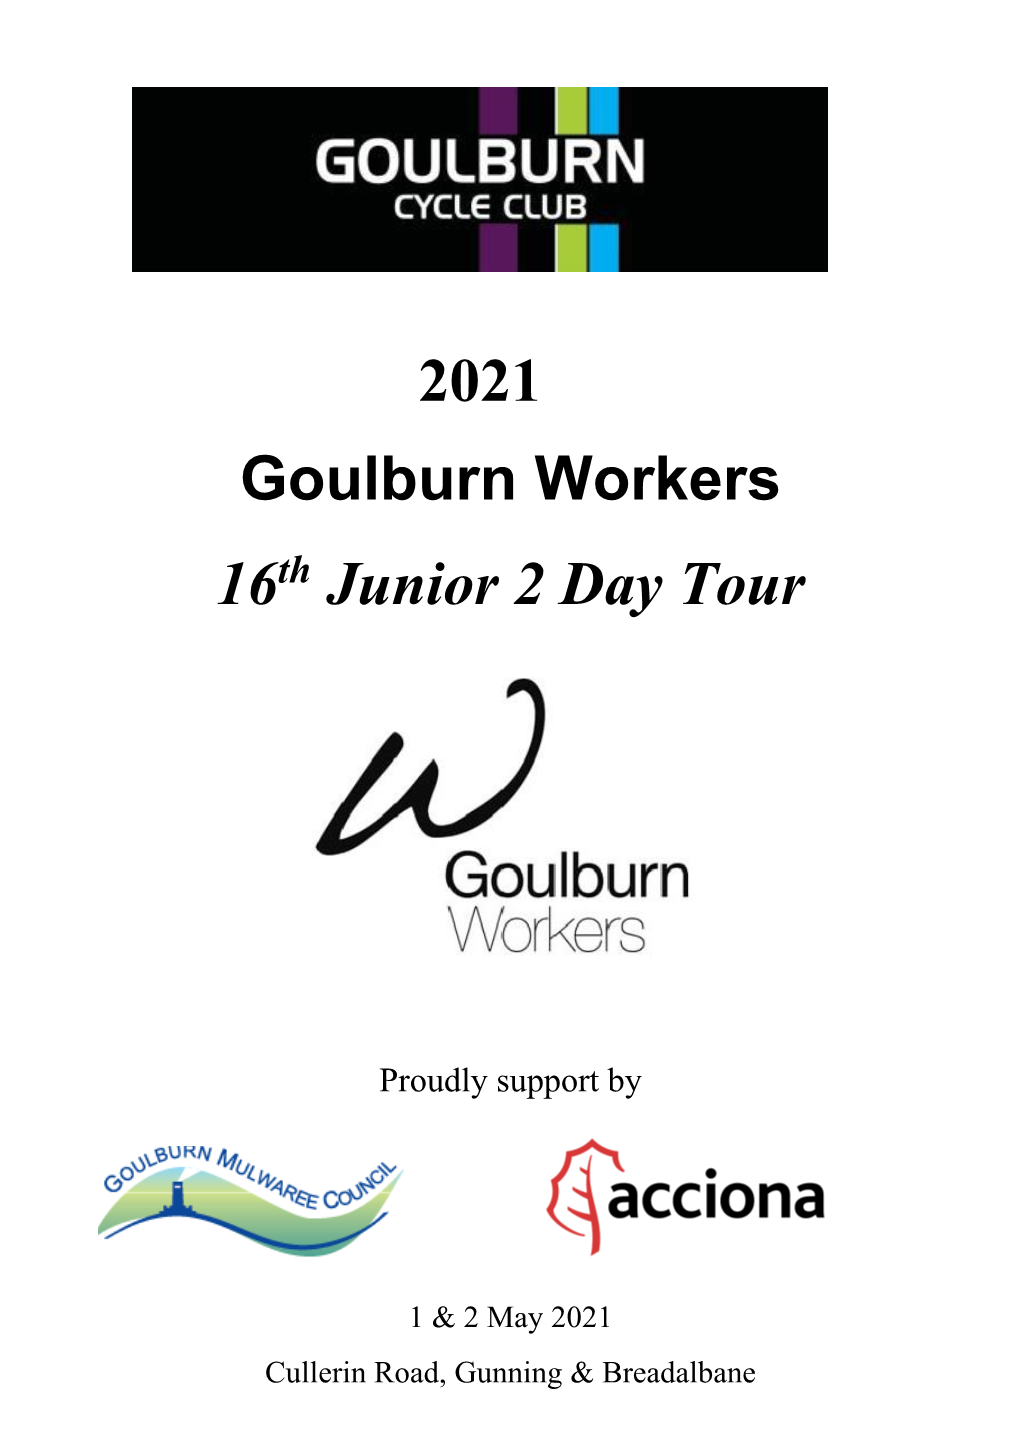 2021 Goulburn Workers 16 Junior 2 Day Tour